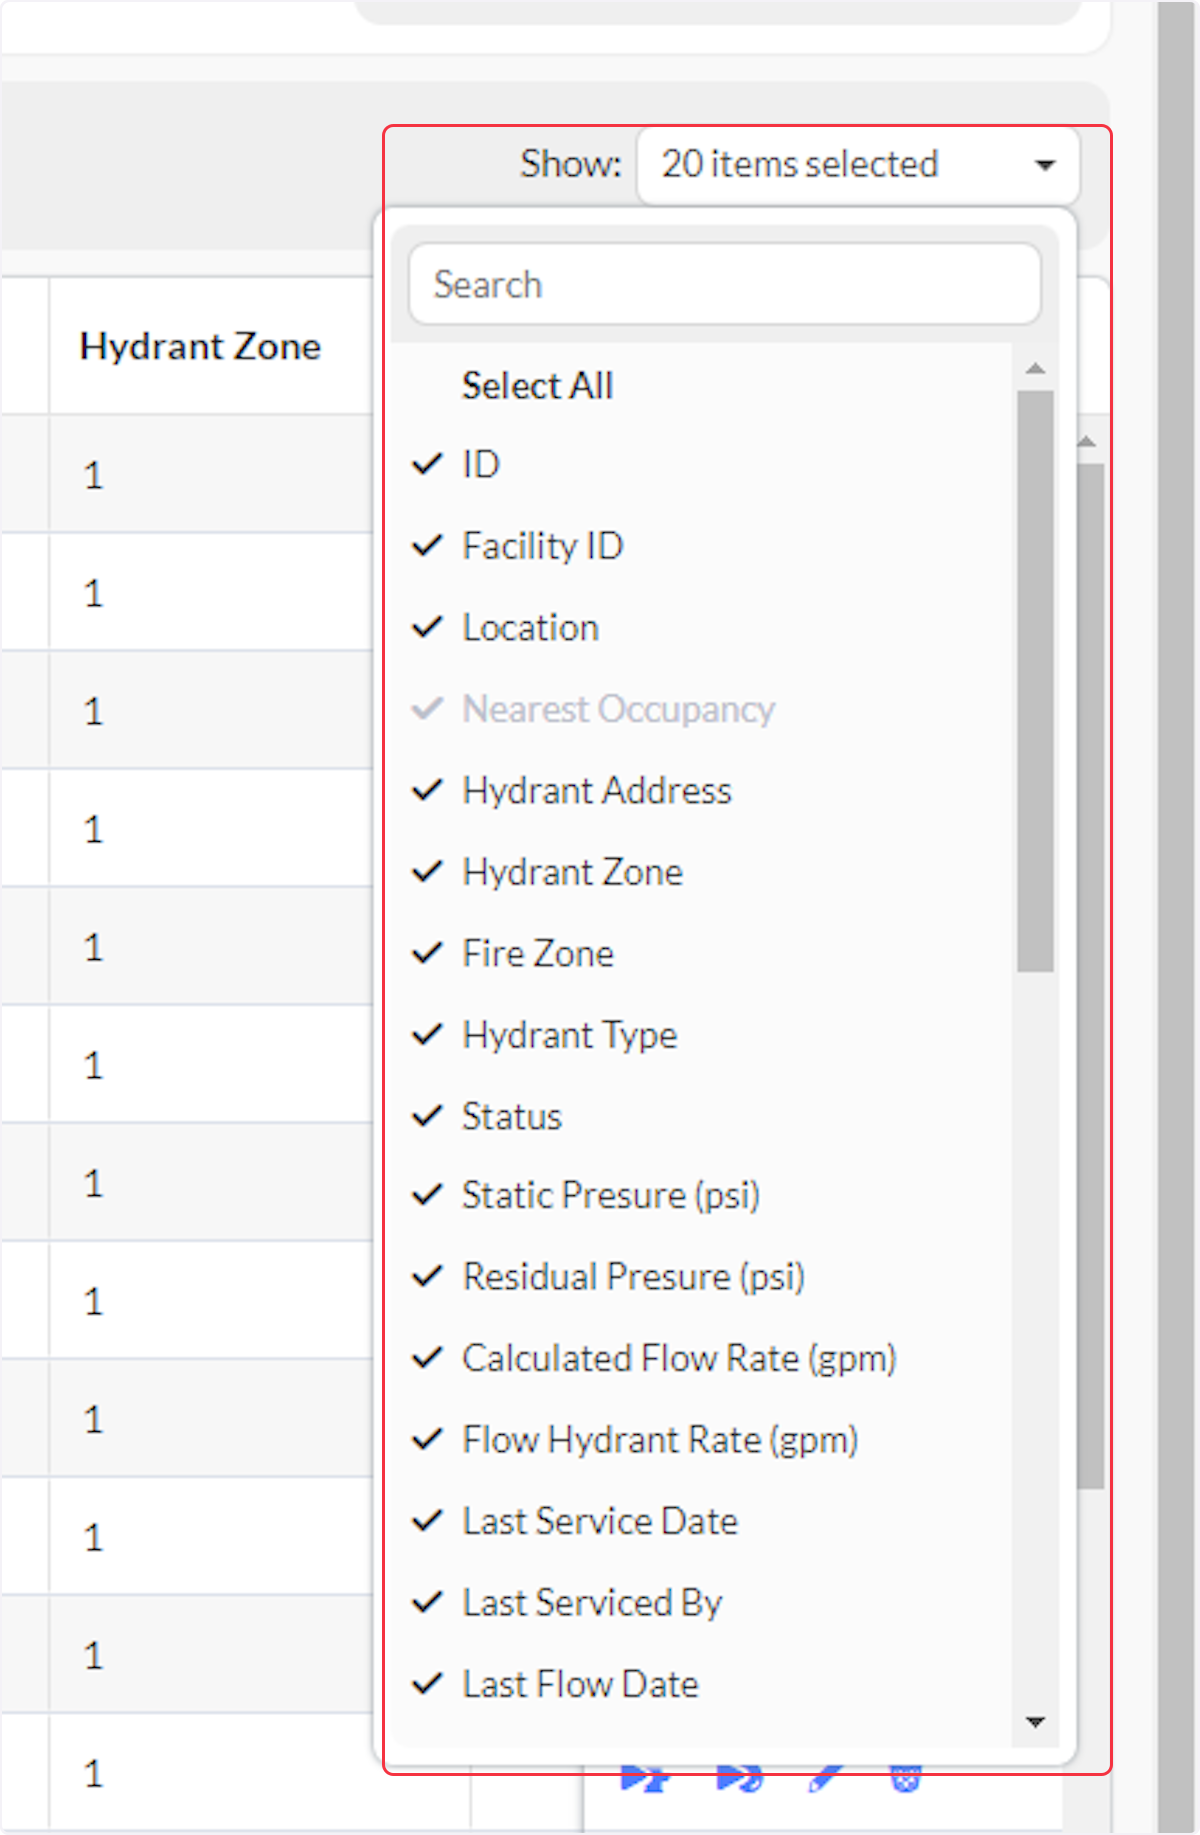 From the Show dropdown you can then select what columns to populate in the grid.